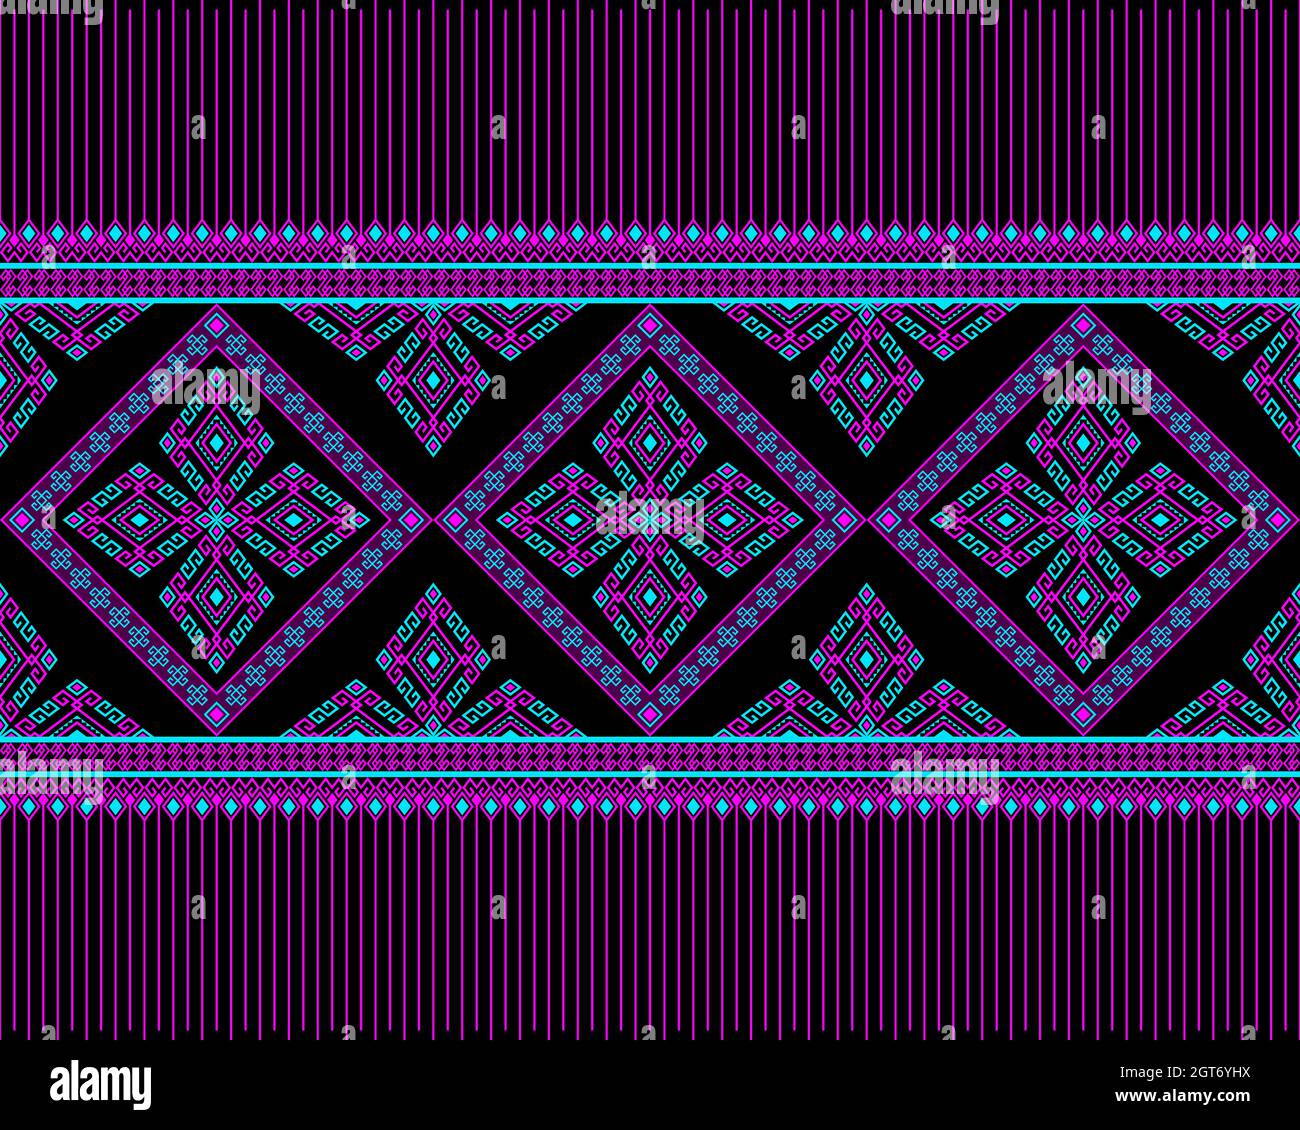 https://c8.alamy.com/comp/2GT6YHX/magenta-turquoise-native-or-tribe-seamless-pattern-on-black-background-in-symmetry-rhombus-geometric-bohemian-style-for-clothing-or-apparelembroidery-2GT6YHX.jpg